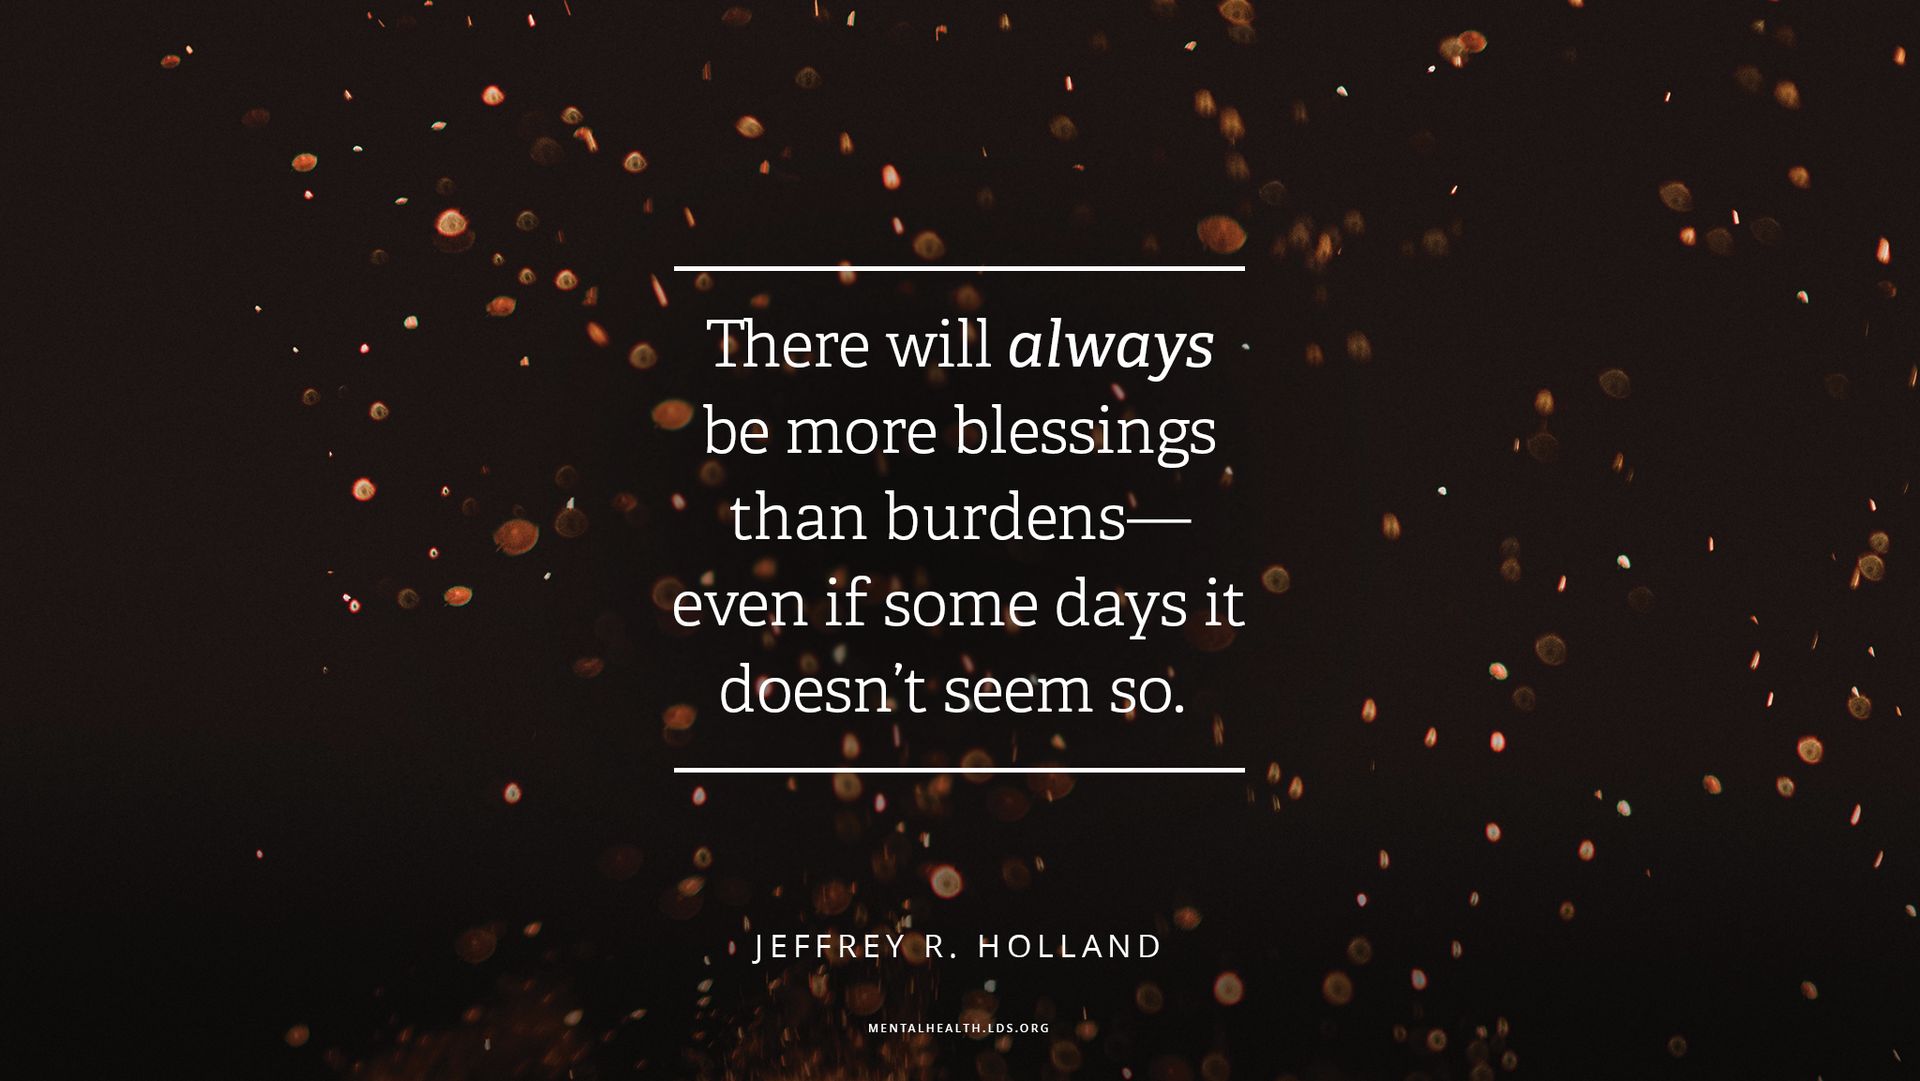 “There will always be more blessings than burdens—even if some days it doesn’t seem so.”—Elder Jeffrey R. Holland, “What I Wish Every New Member Knew”